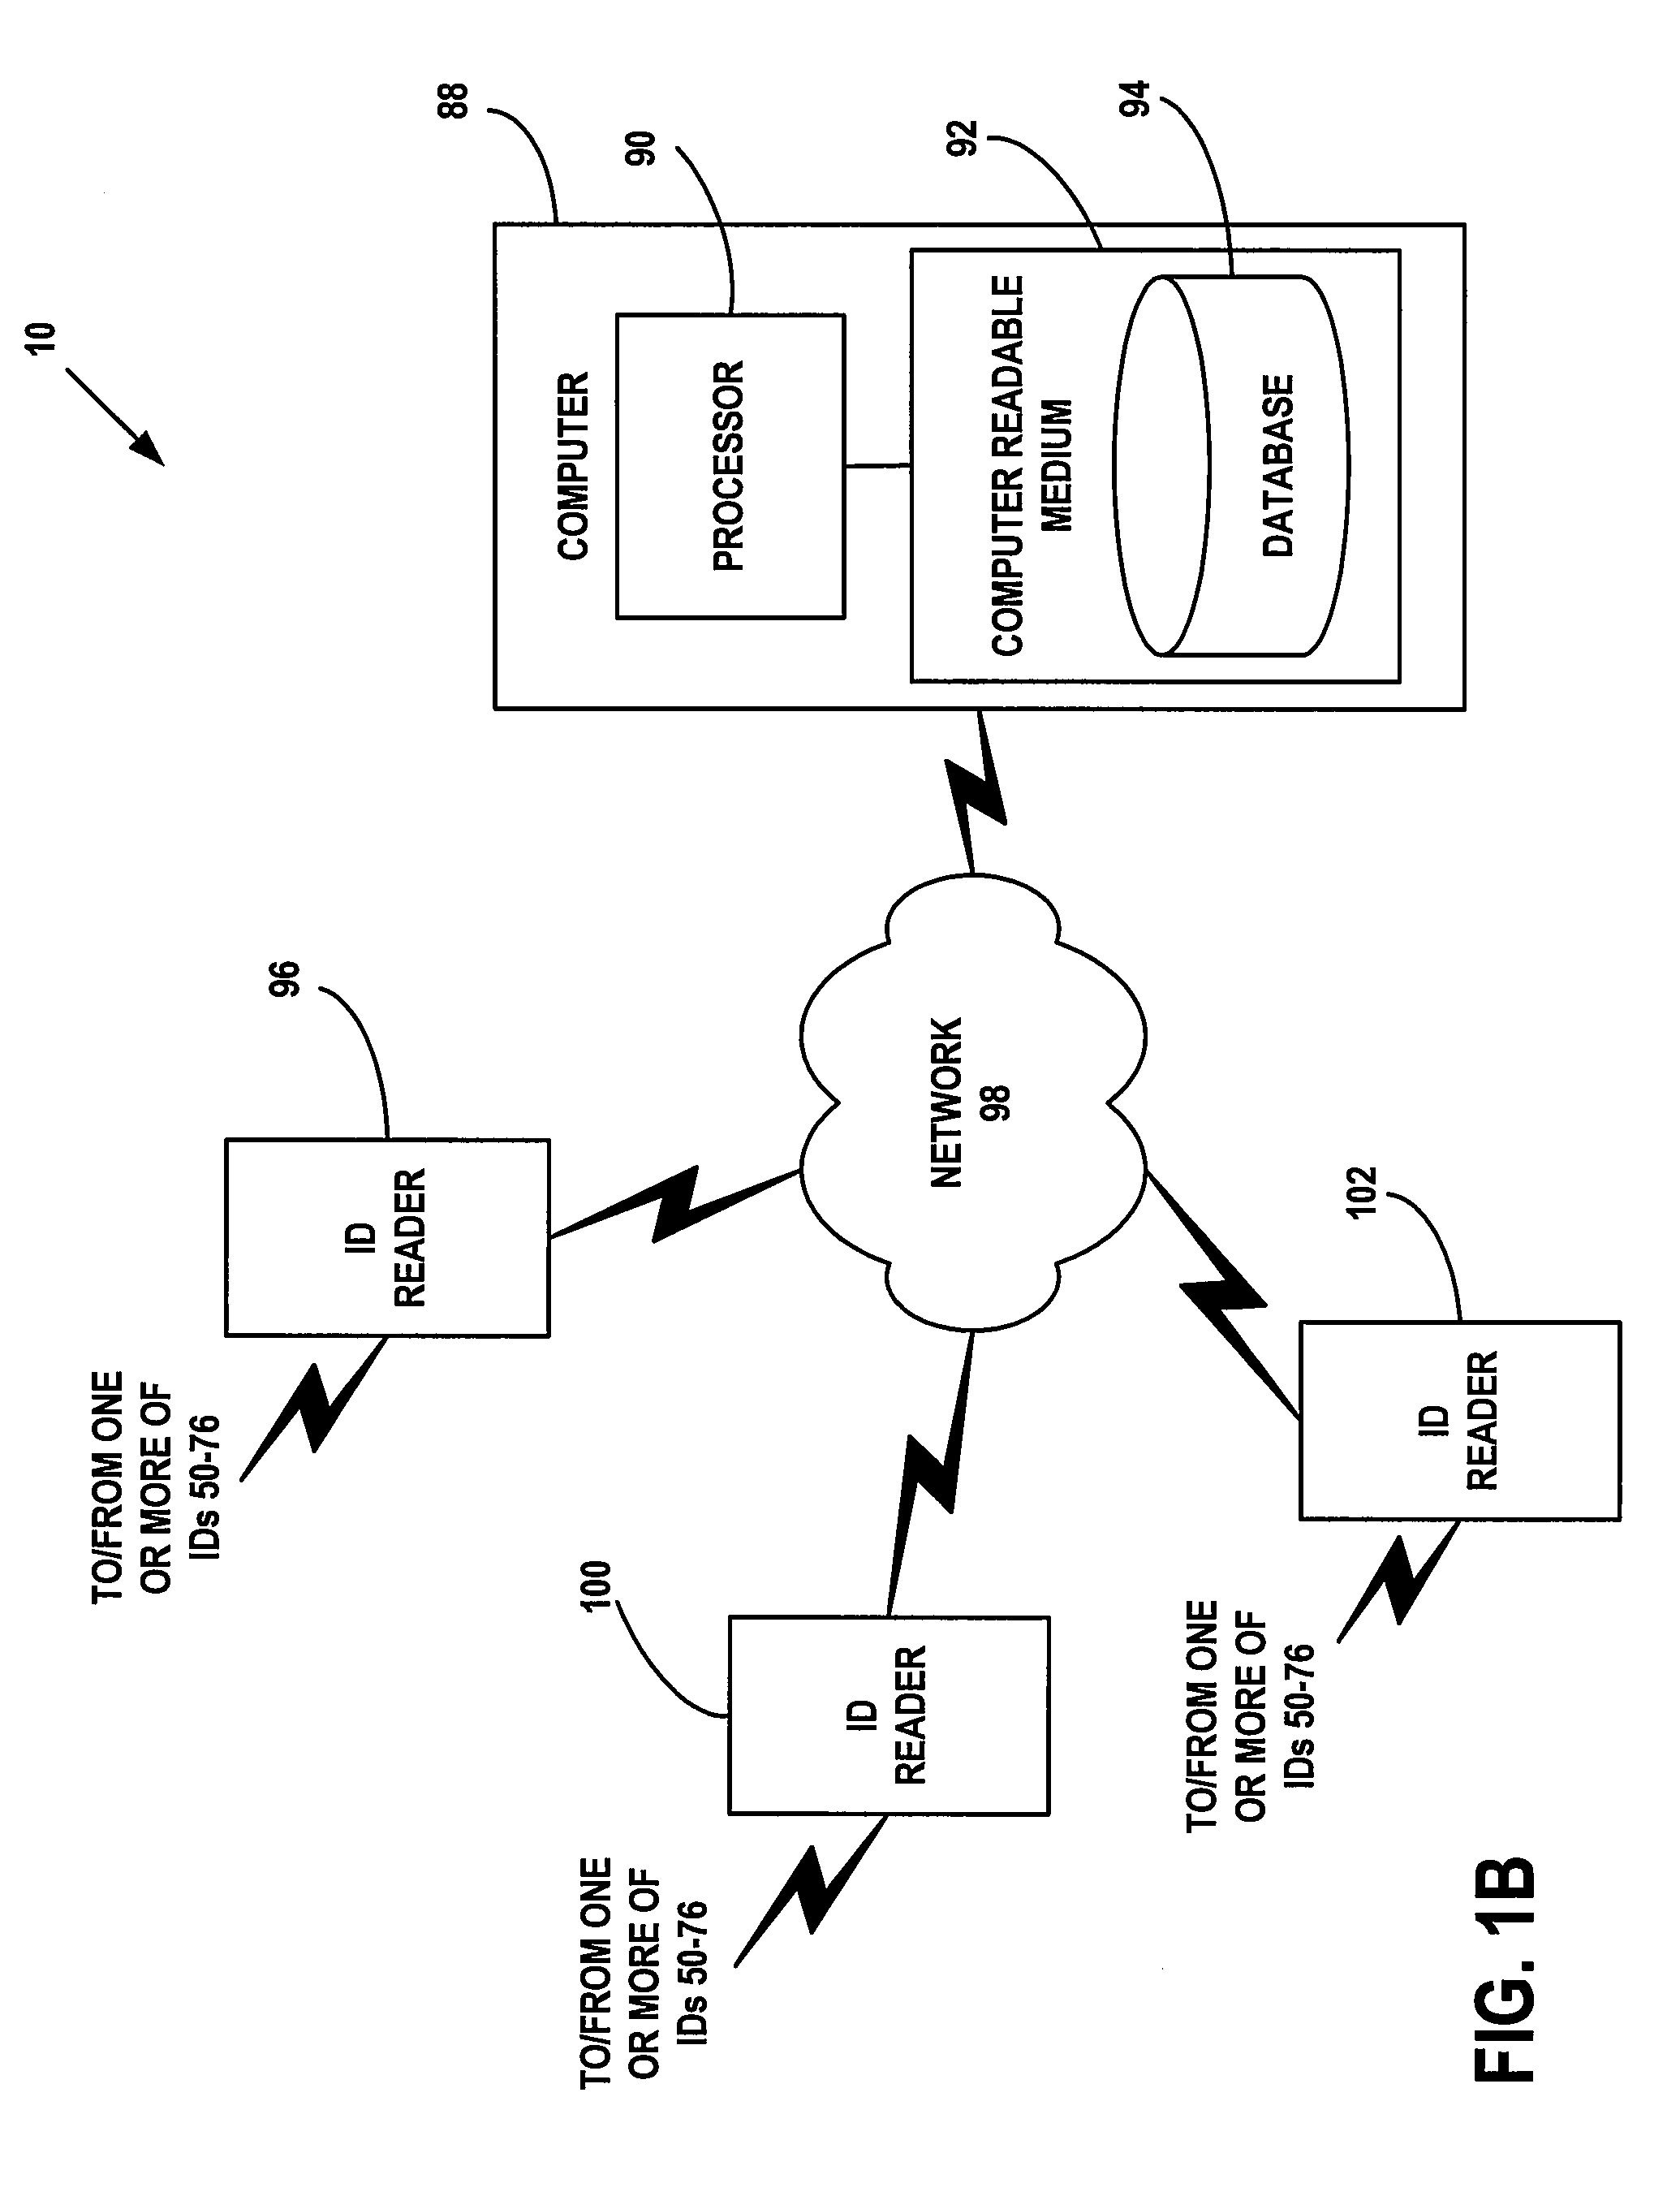 Apparatus and methods for evaluating systems associated with wellheads